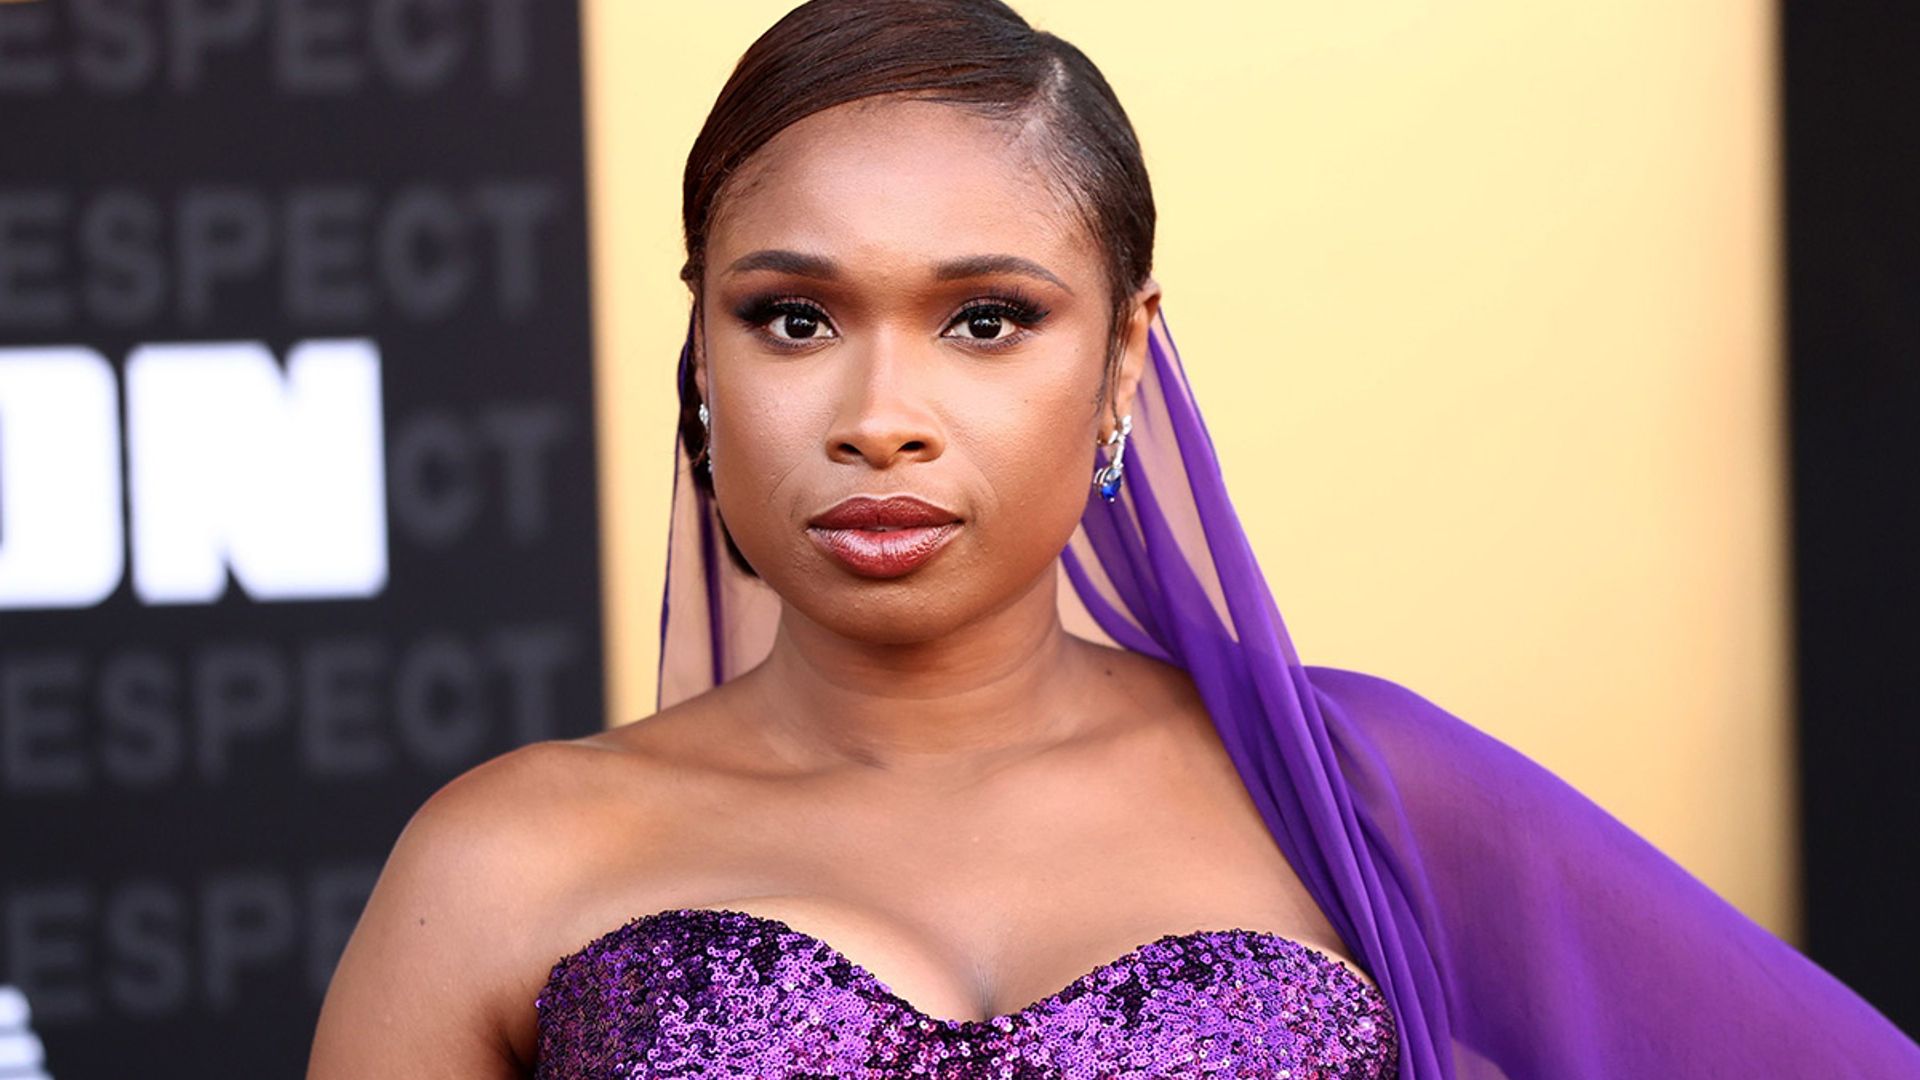 Jennifer Hudson: what happened to her family? Her tragic past in detail | HELLO!